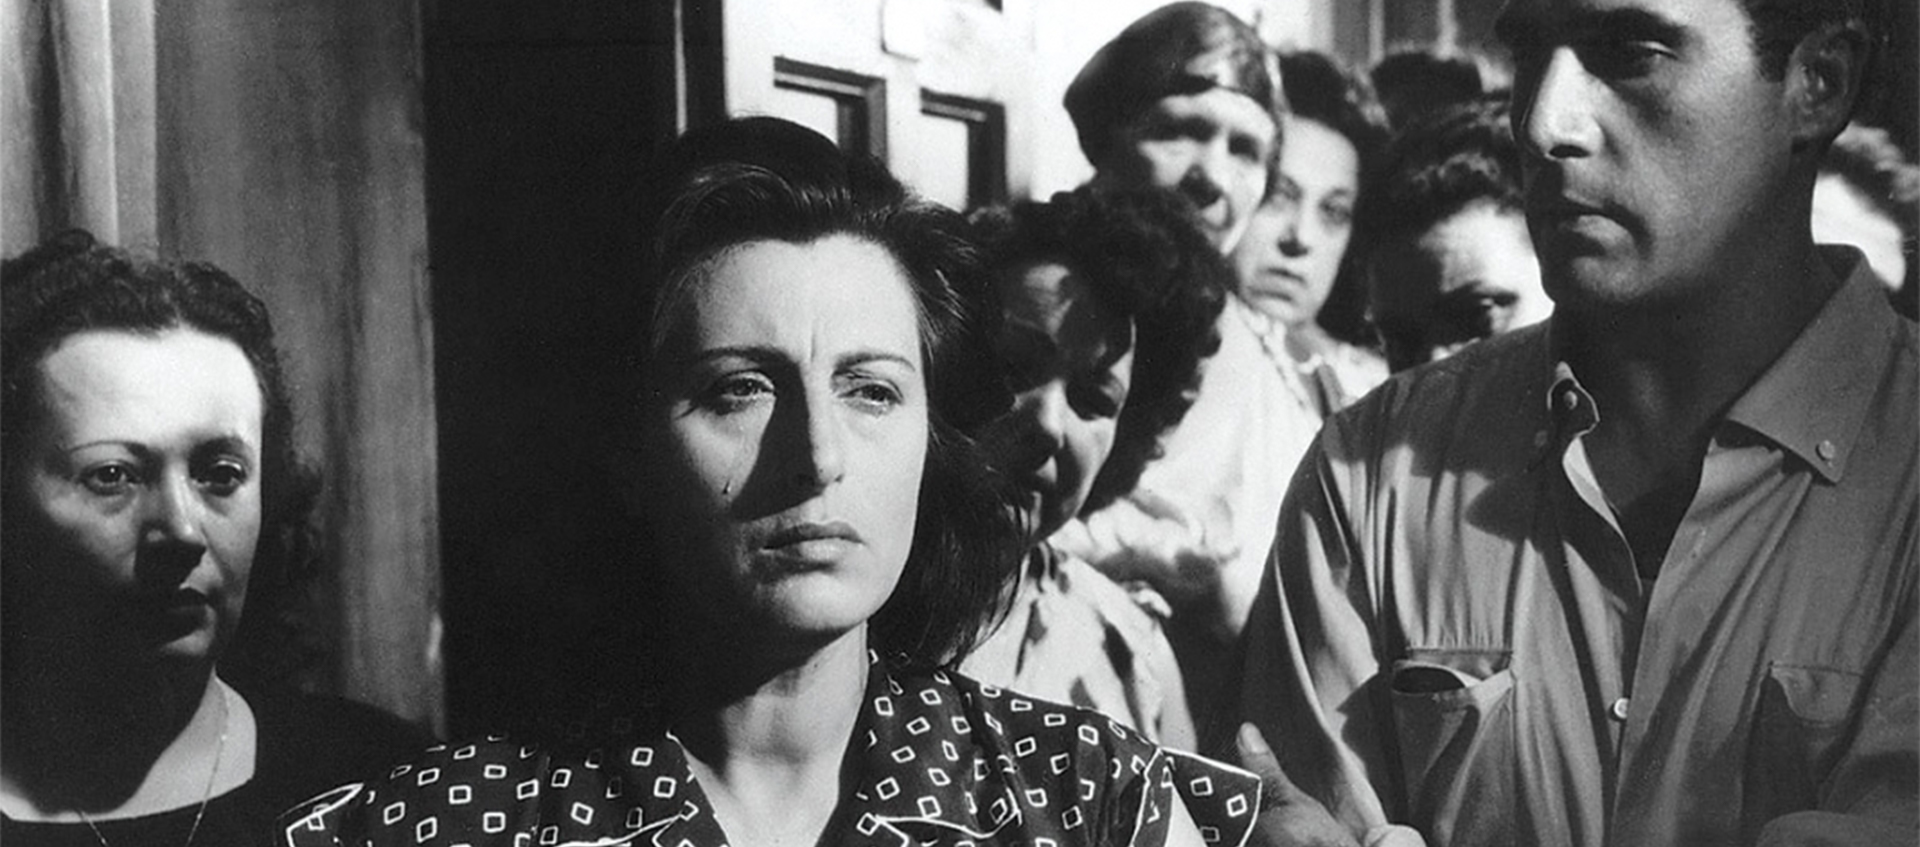 Magnani in crowd looking off camera